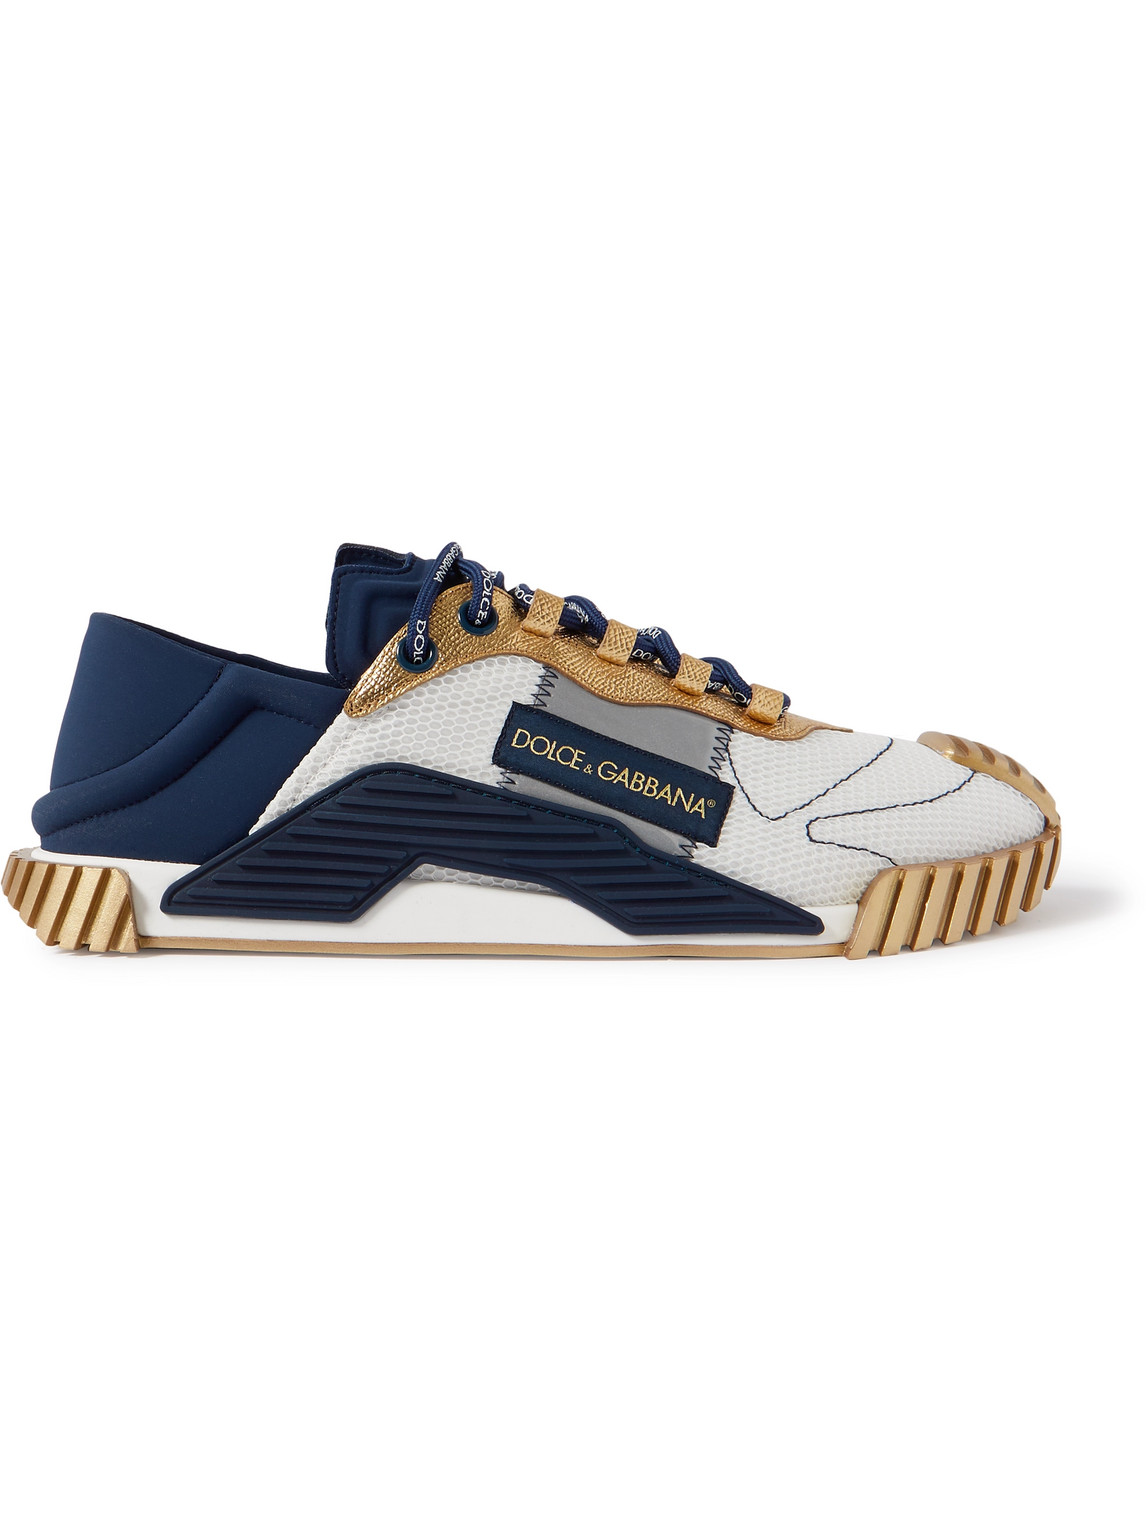 Dolce & Gabbana Mesh, Neoprene, Leather And Rubber Sneakers In Blue